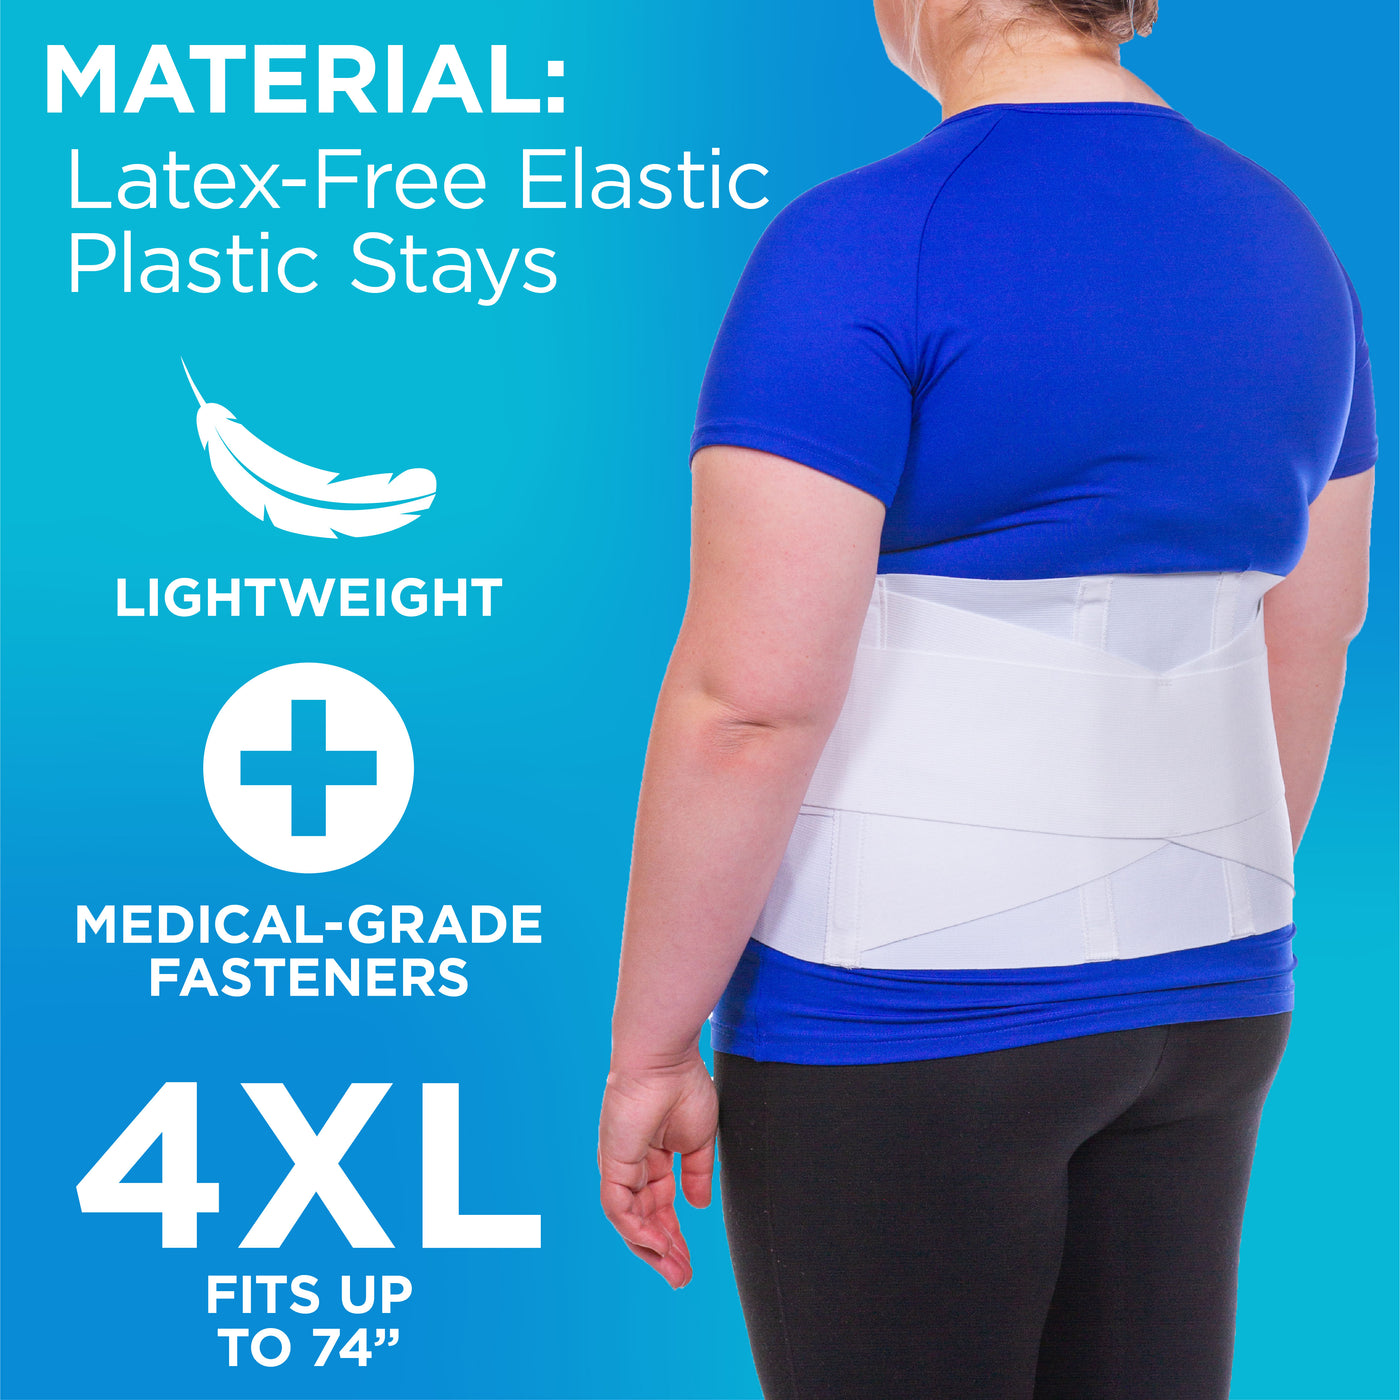 This big plus-size back support is composed of premium-quality elastic that hugs the body